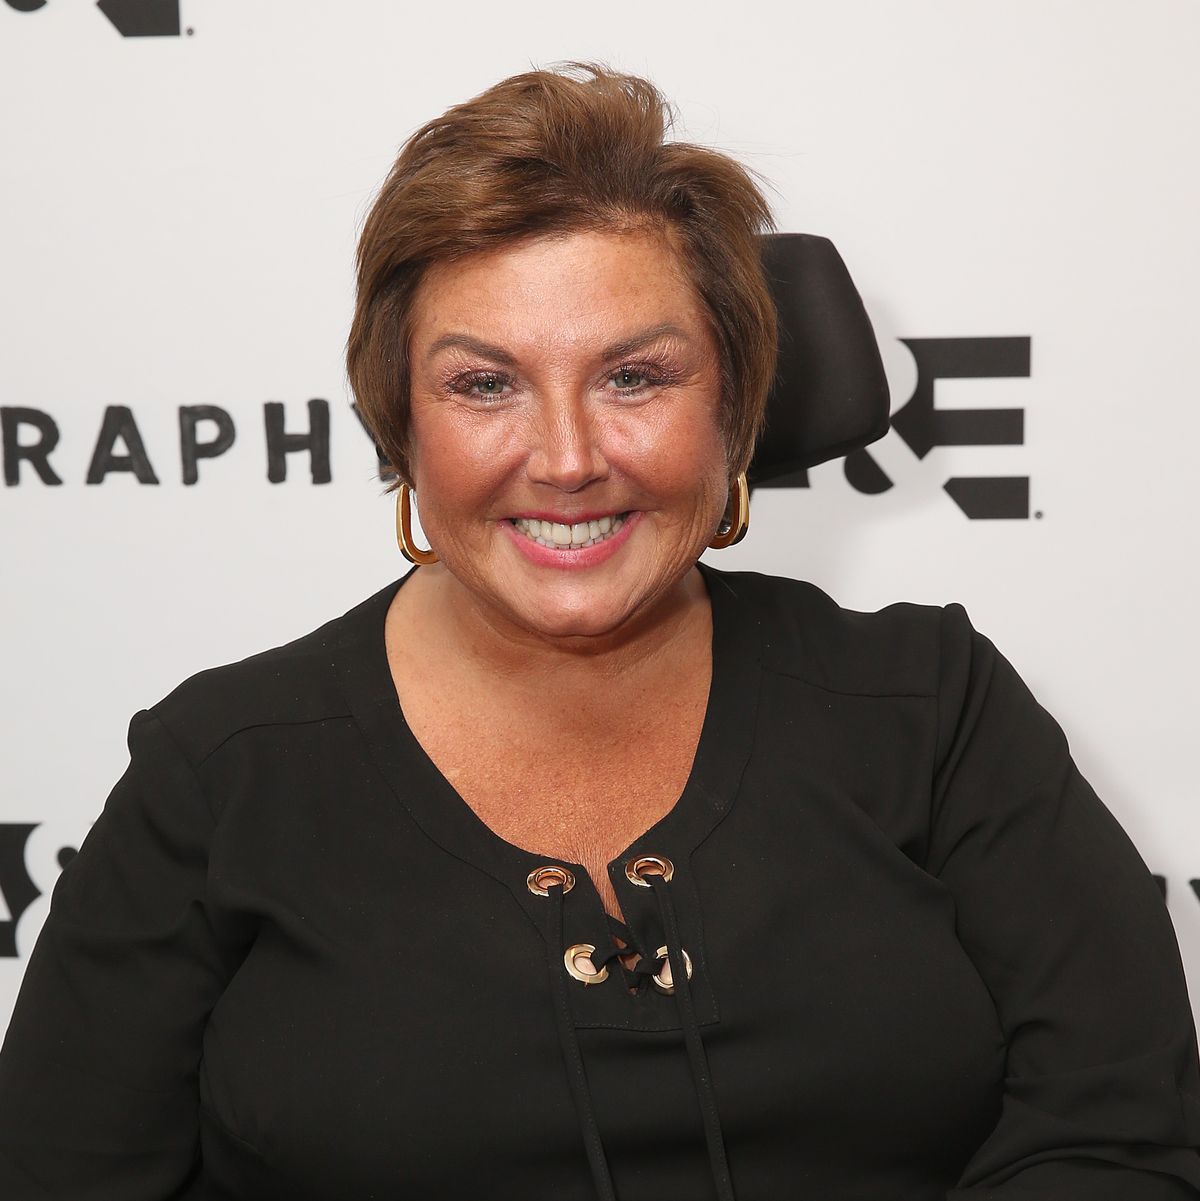 abby-lee-miller-fell-out-of-wheelchair